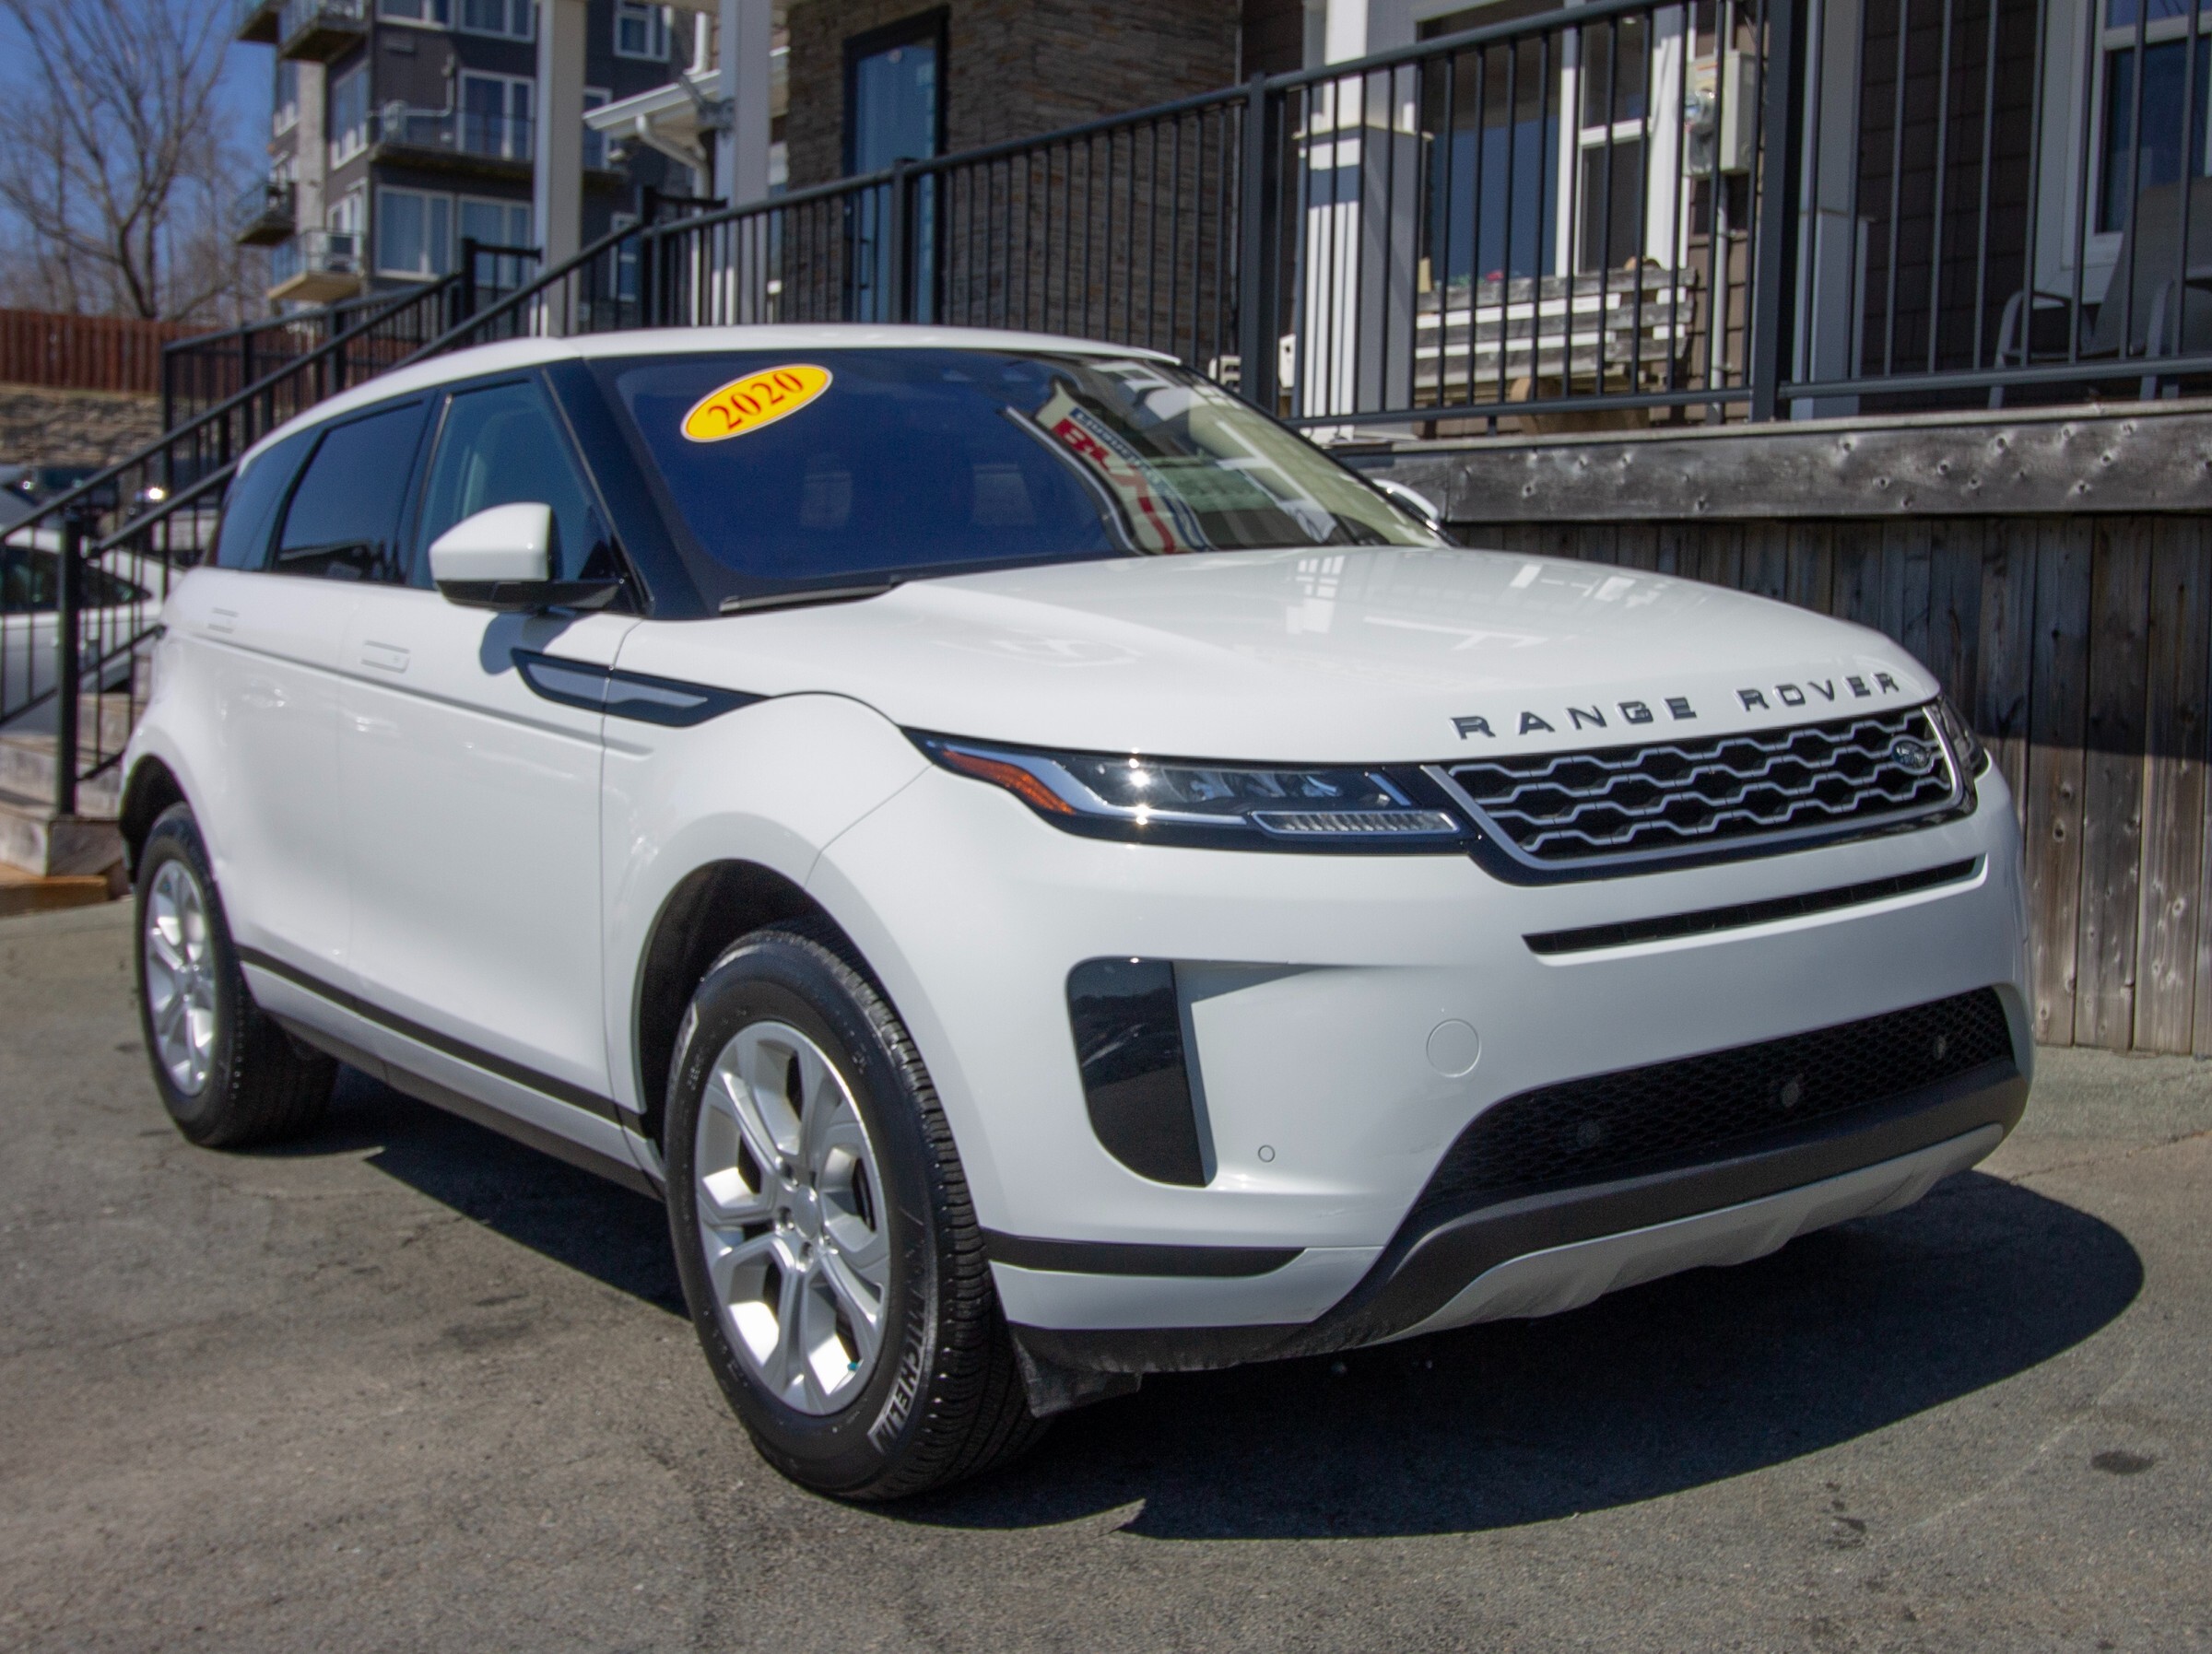 2020 Land Rover Range Rover Evoque PANO ROOF | 2.0L TURBO | ALLOYS | GPS | LEATHER | 